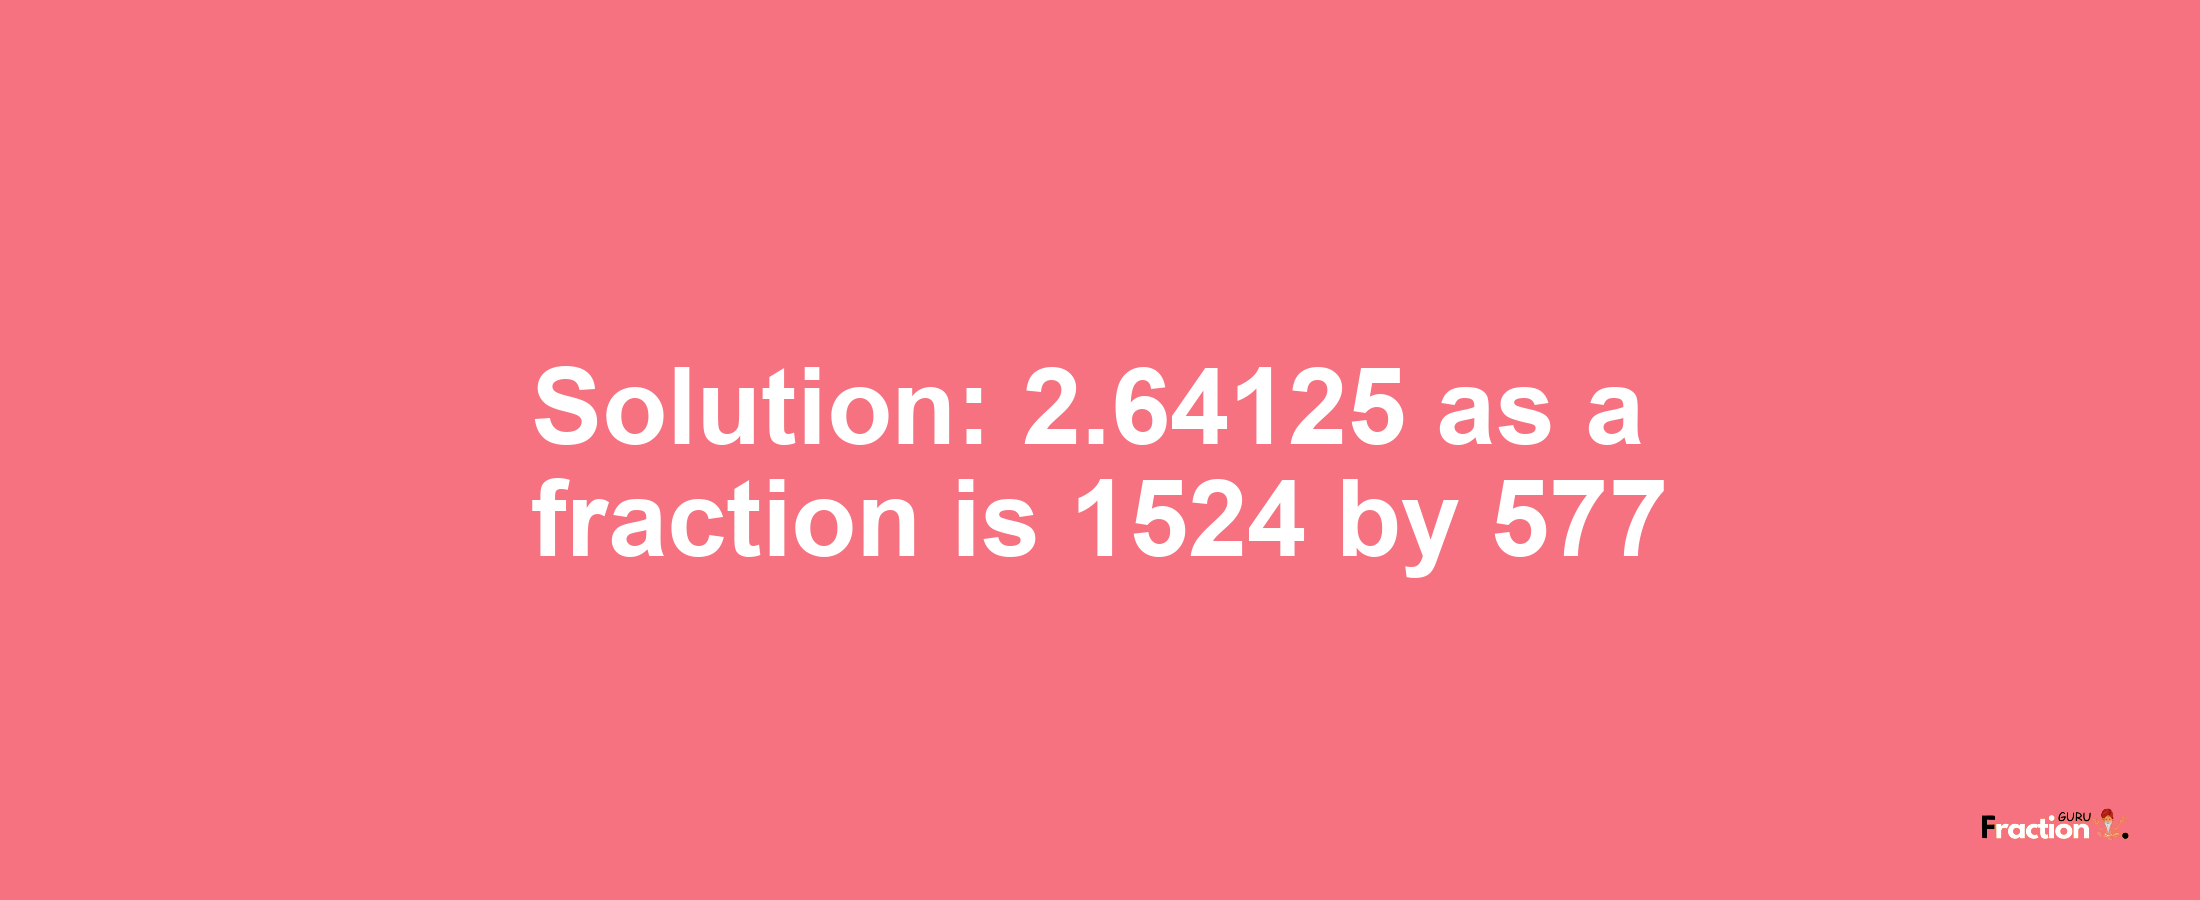 Solution:2.64125 as a fraction is 1524/577